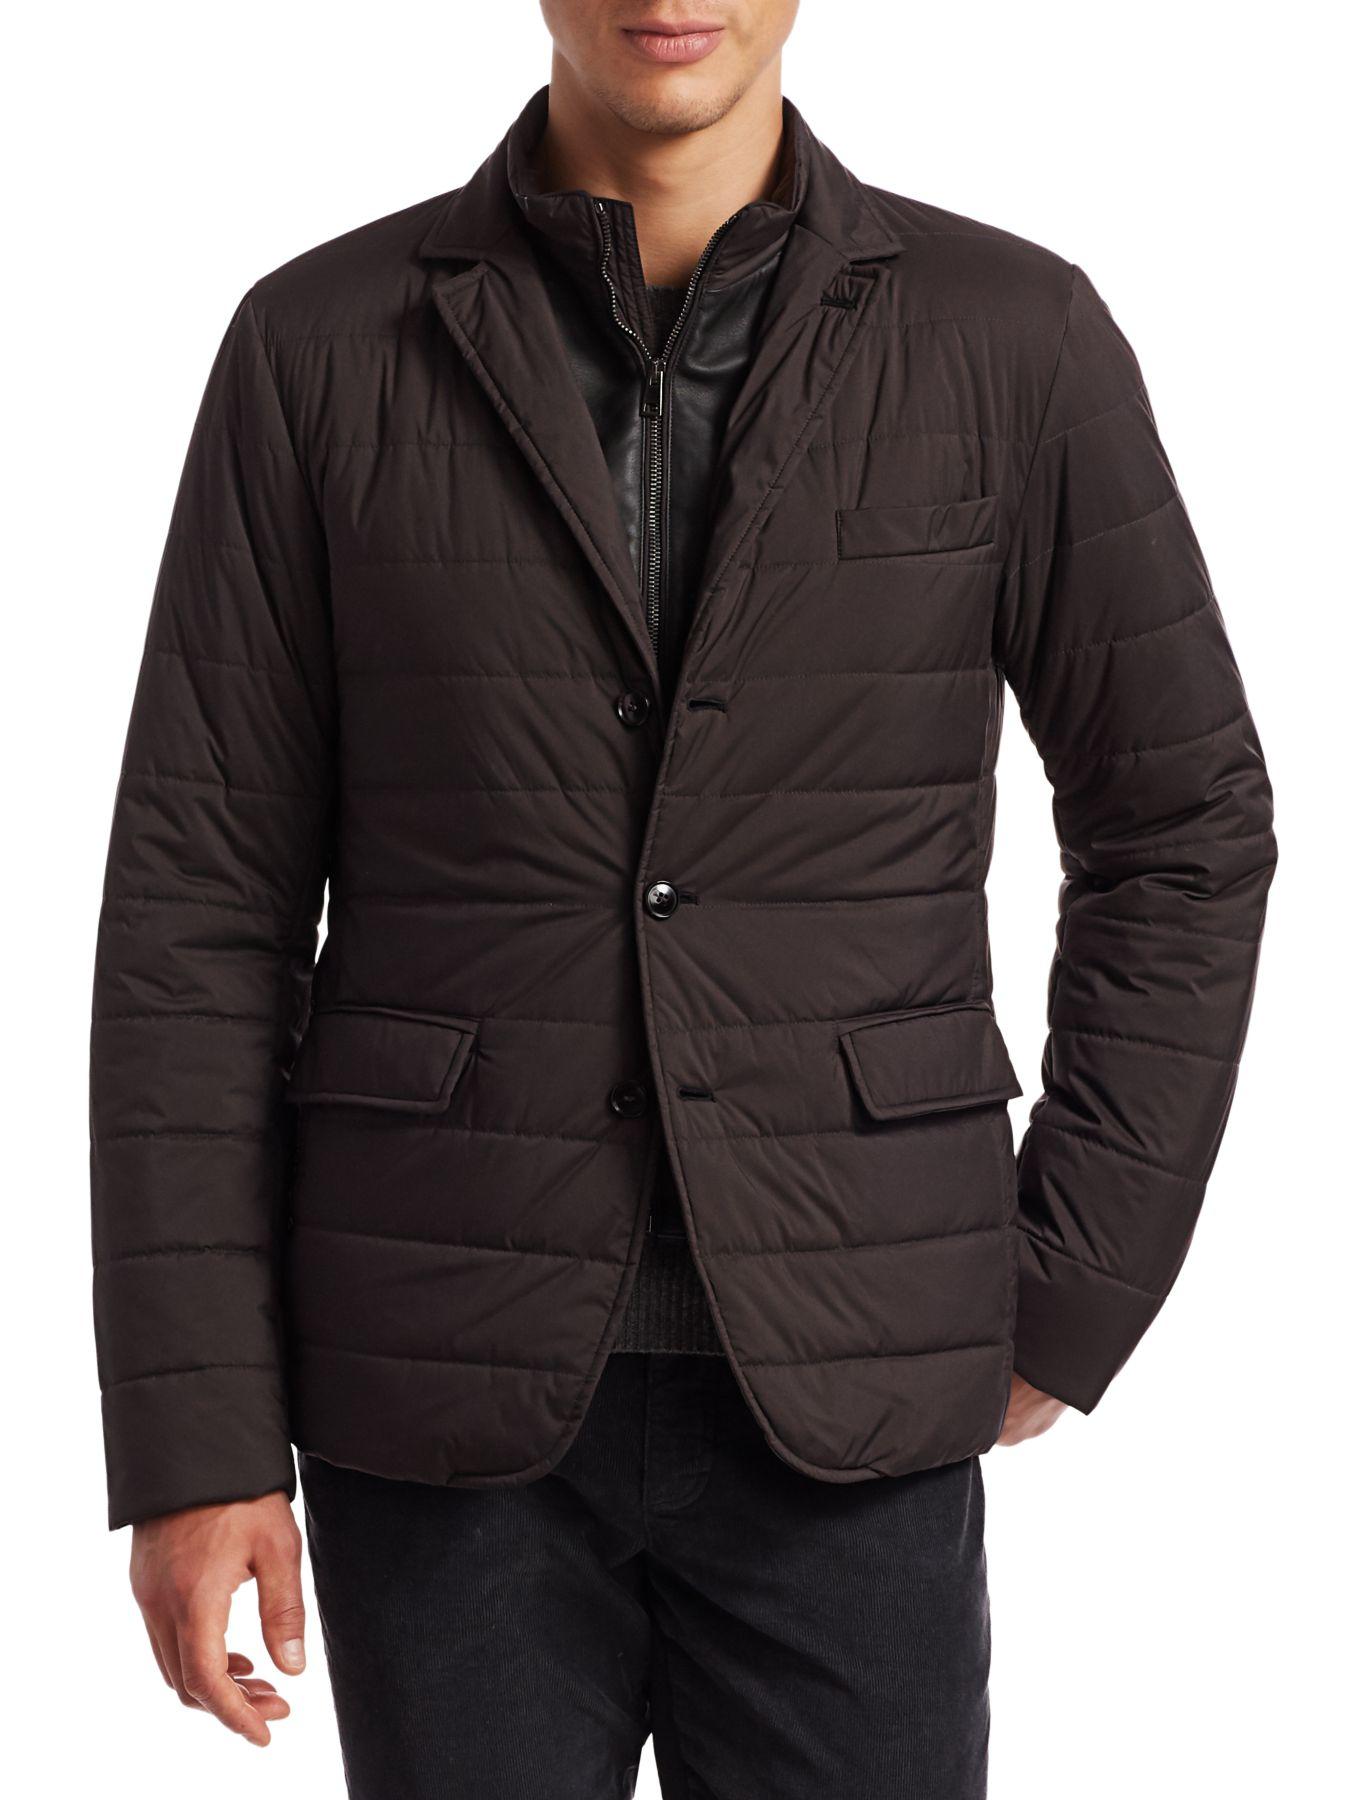 Saks Fifth Avenue Leather Puffer Style Sport Jacket in Dark Charcoal ...